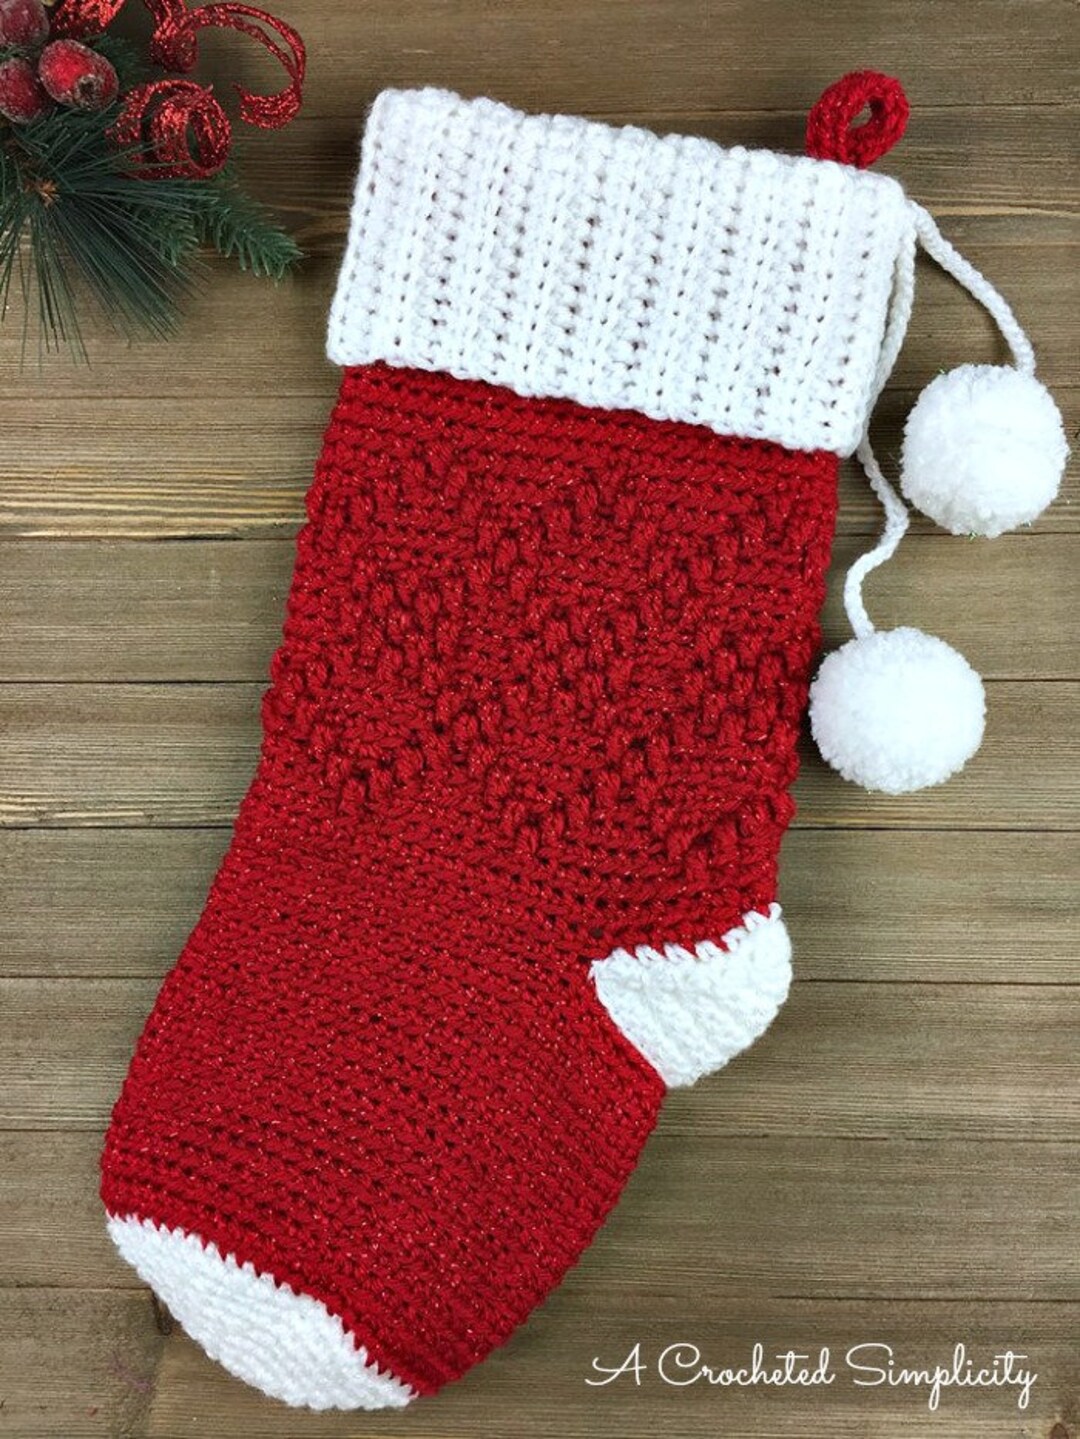 13 Days of Christmas Giveaways - A Crocheted Simplicity